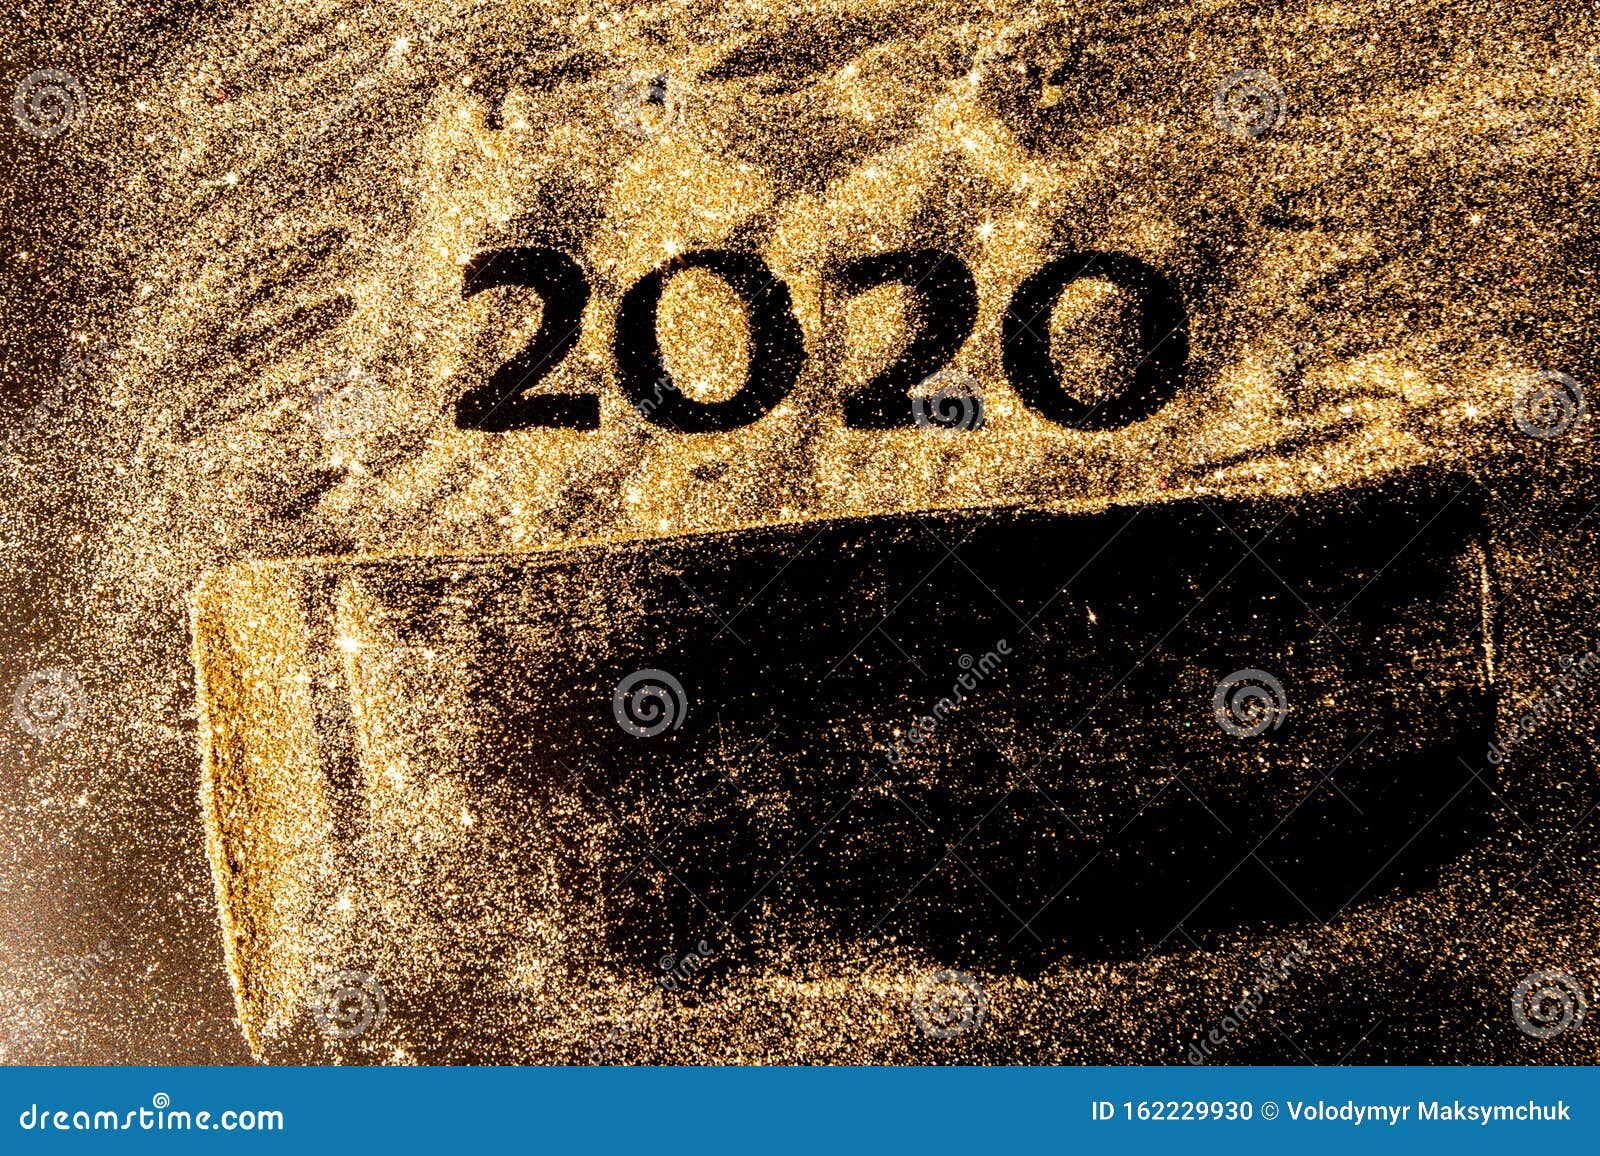 Happy New Year 2020. Creative Collage of Numbers Two and Zero Made ...